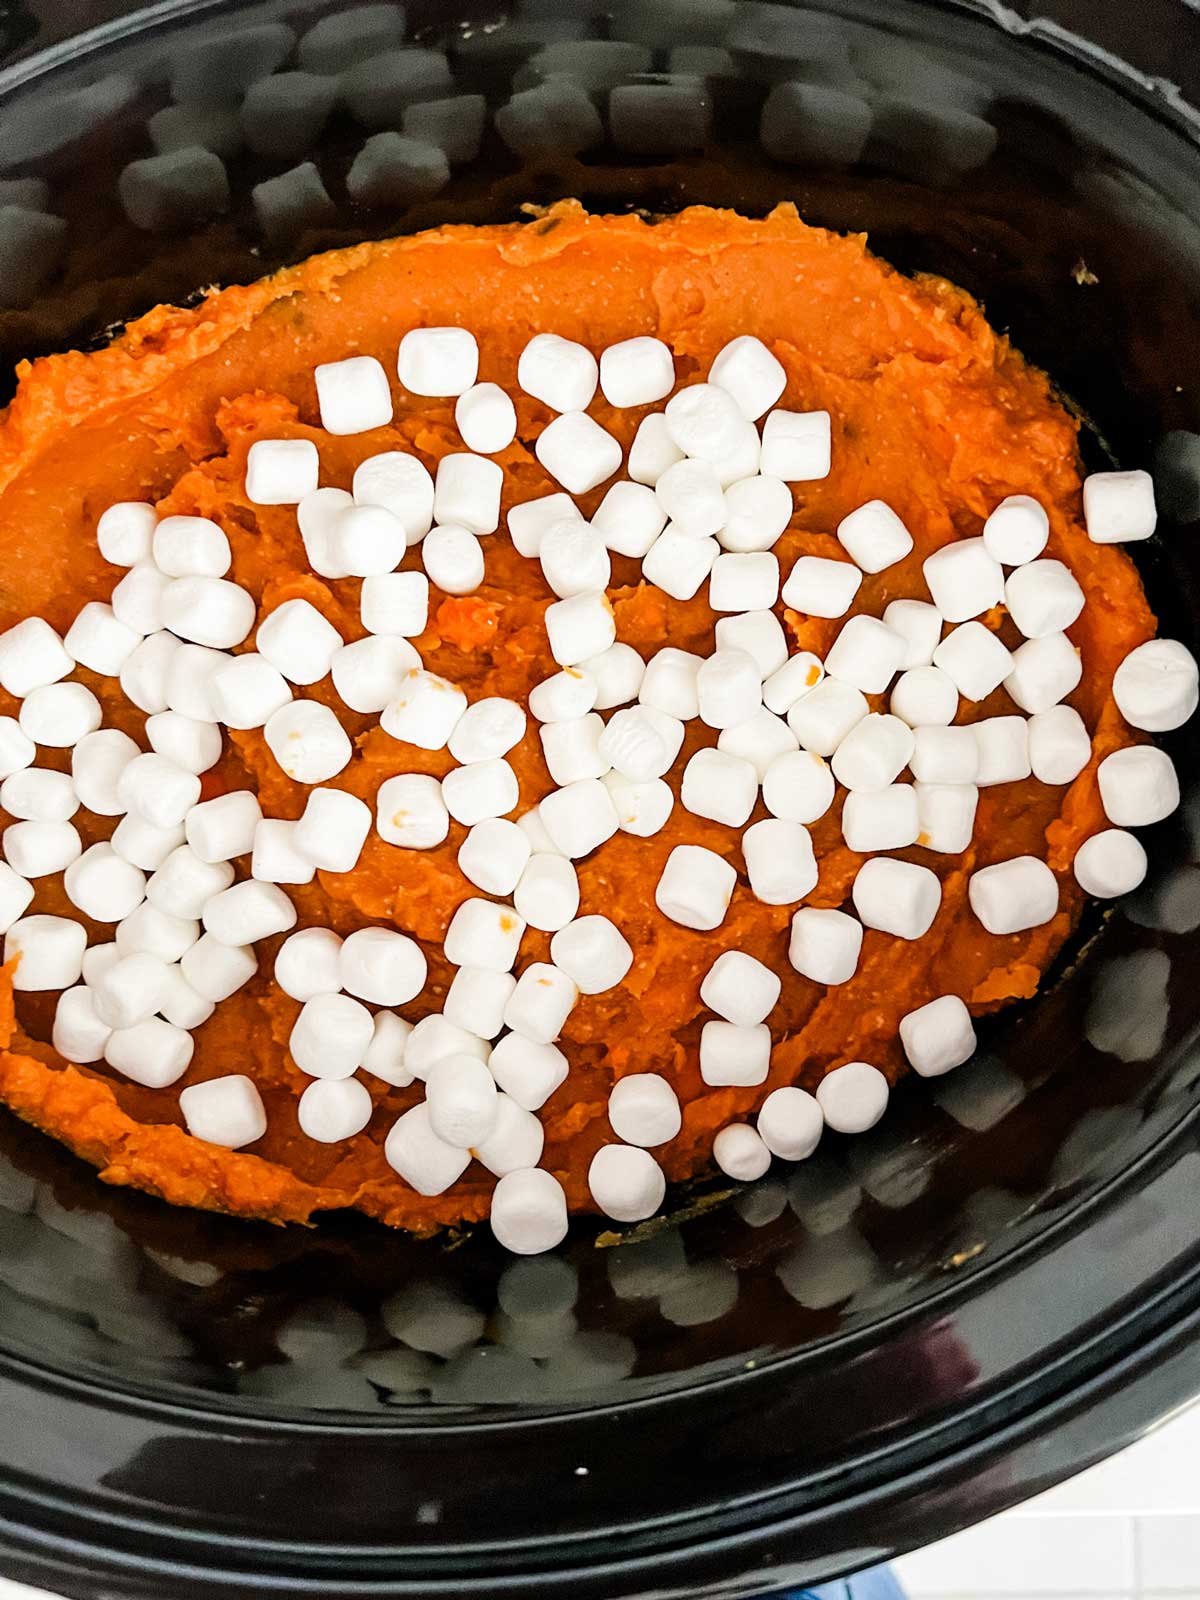 Crockpot sweet potato casserole with marshmallows on top of it in a slow cooker.